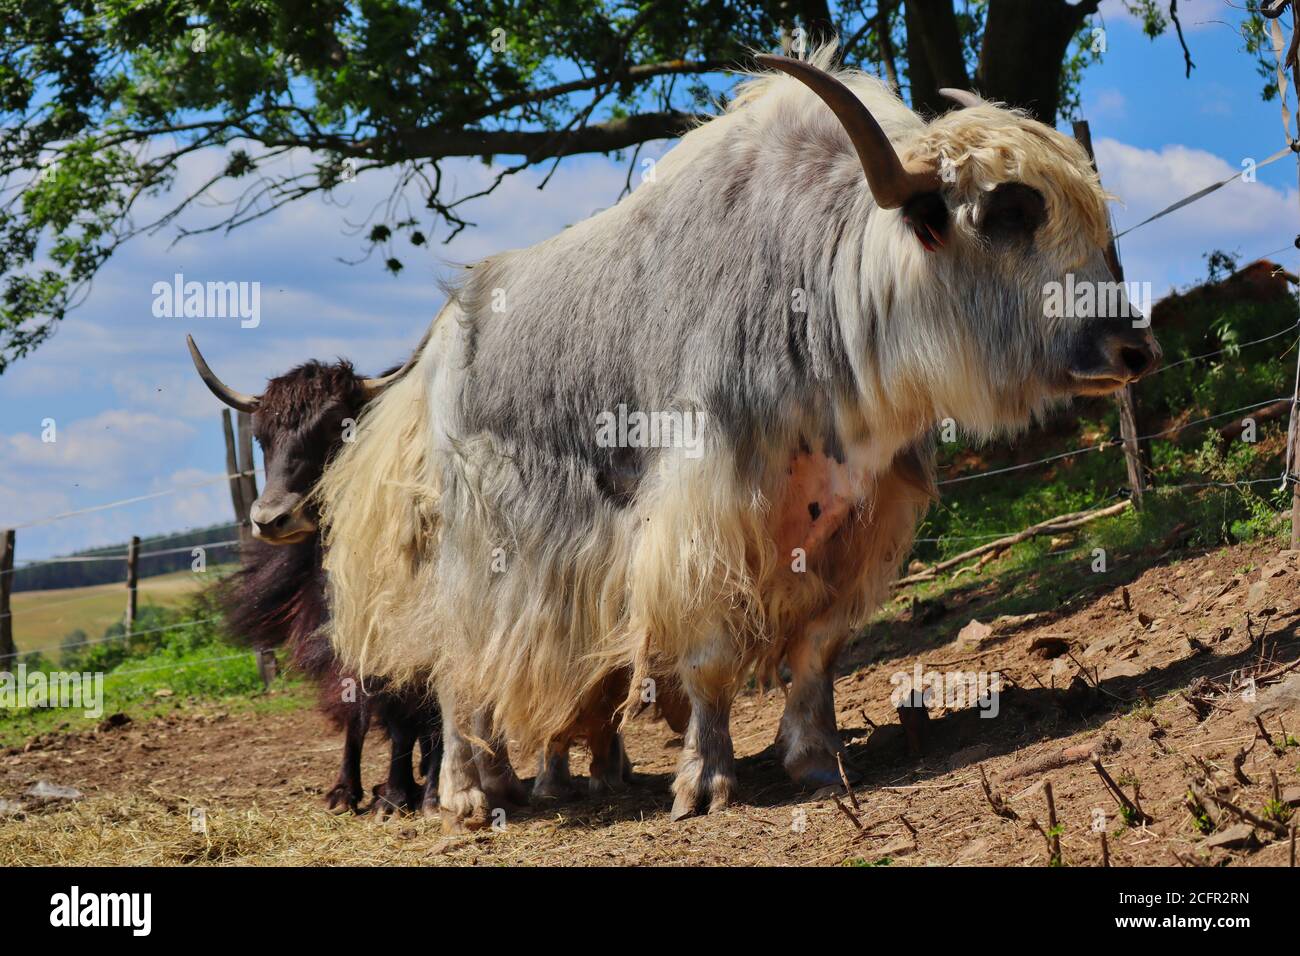 White Domestic Yak with Black Yak behind it. Two Bos Grunniens in Czech Farm Park during Sunny Day. Domestic Yak is Long-Haired Domesticated Bovid. Stock Photo